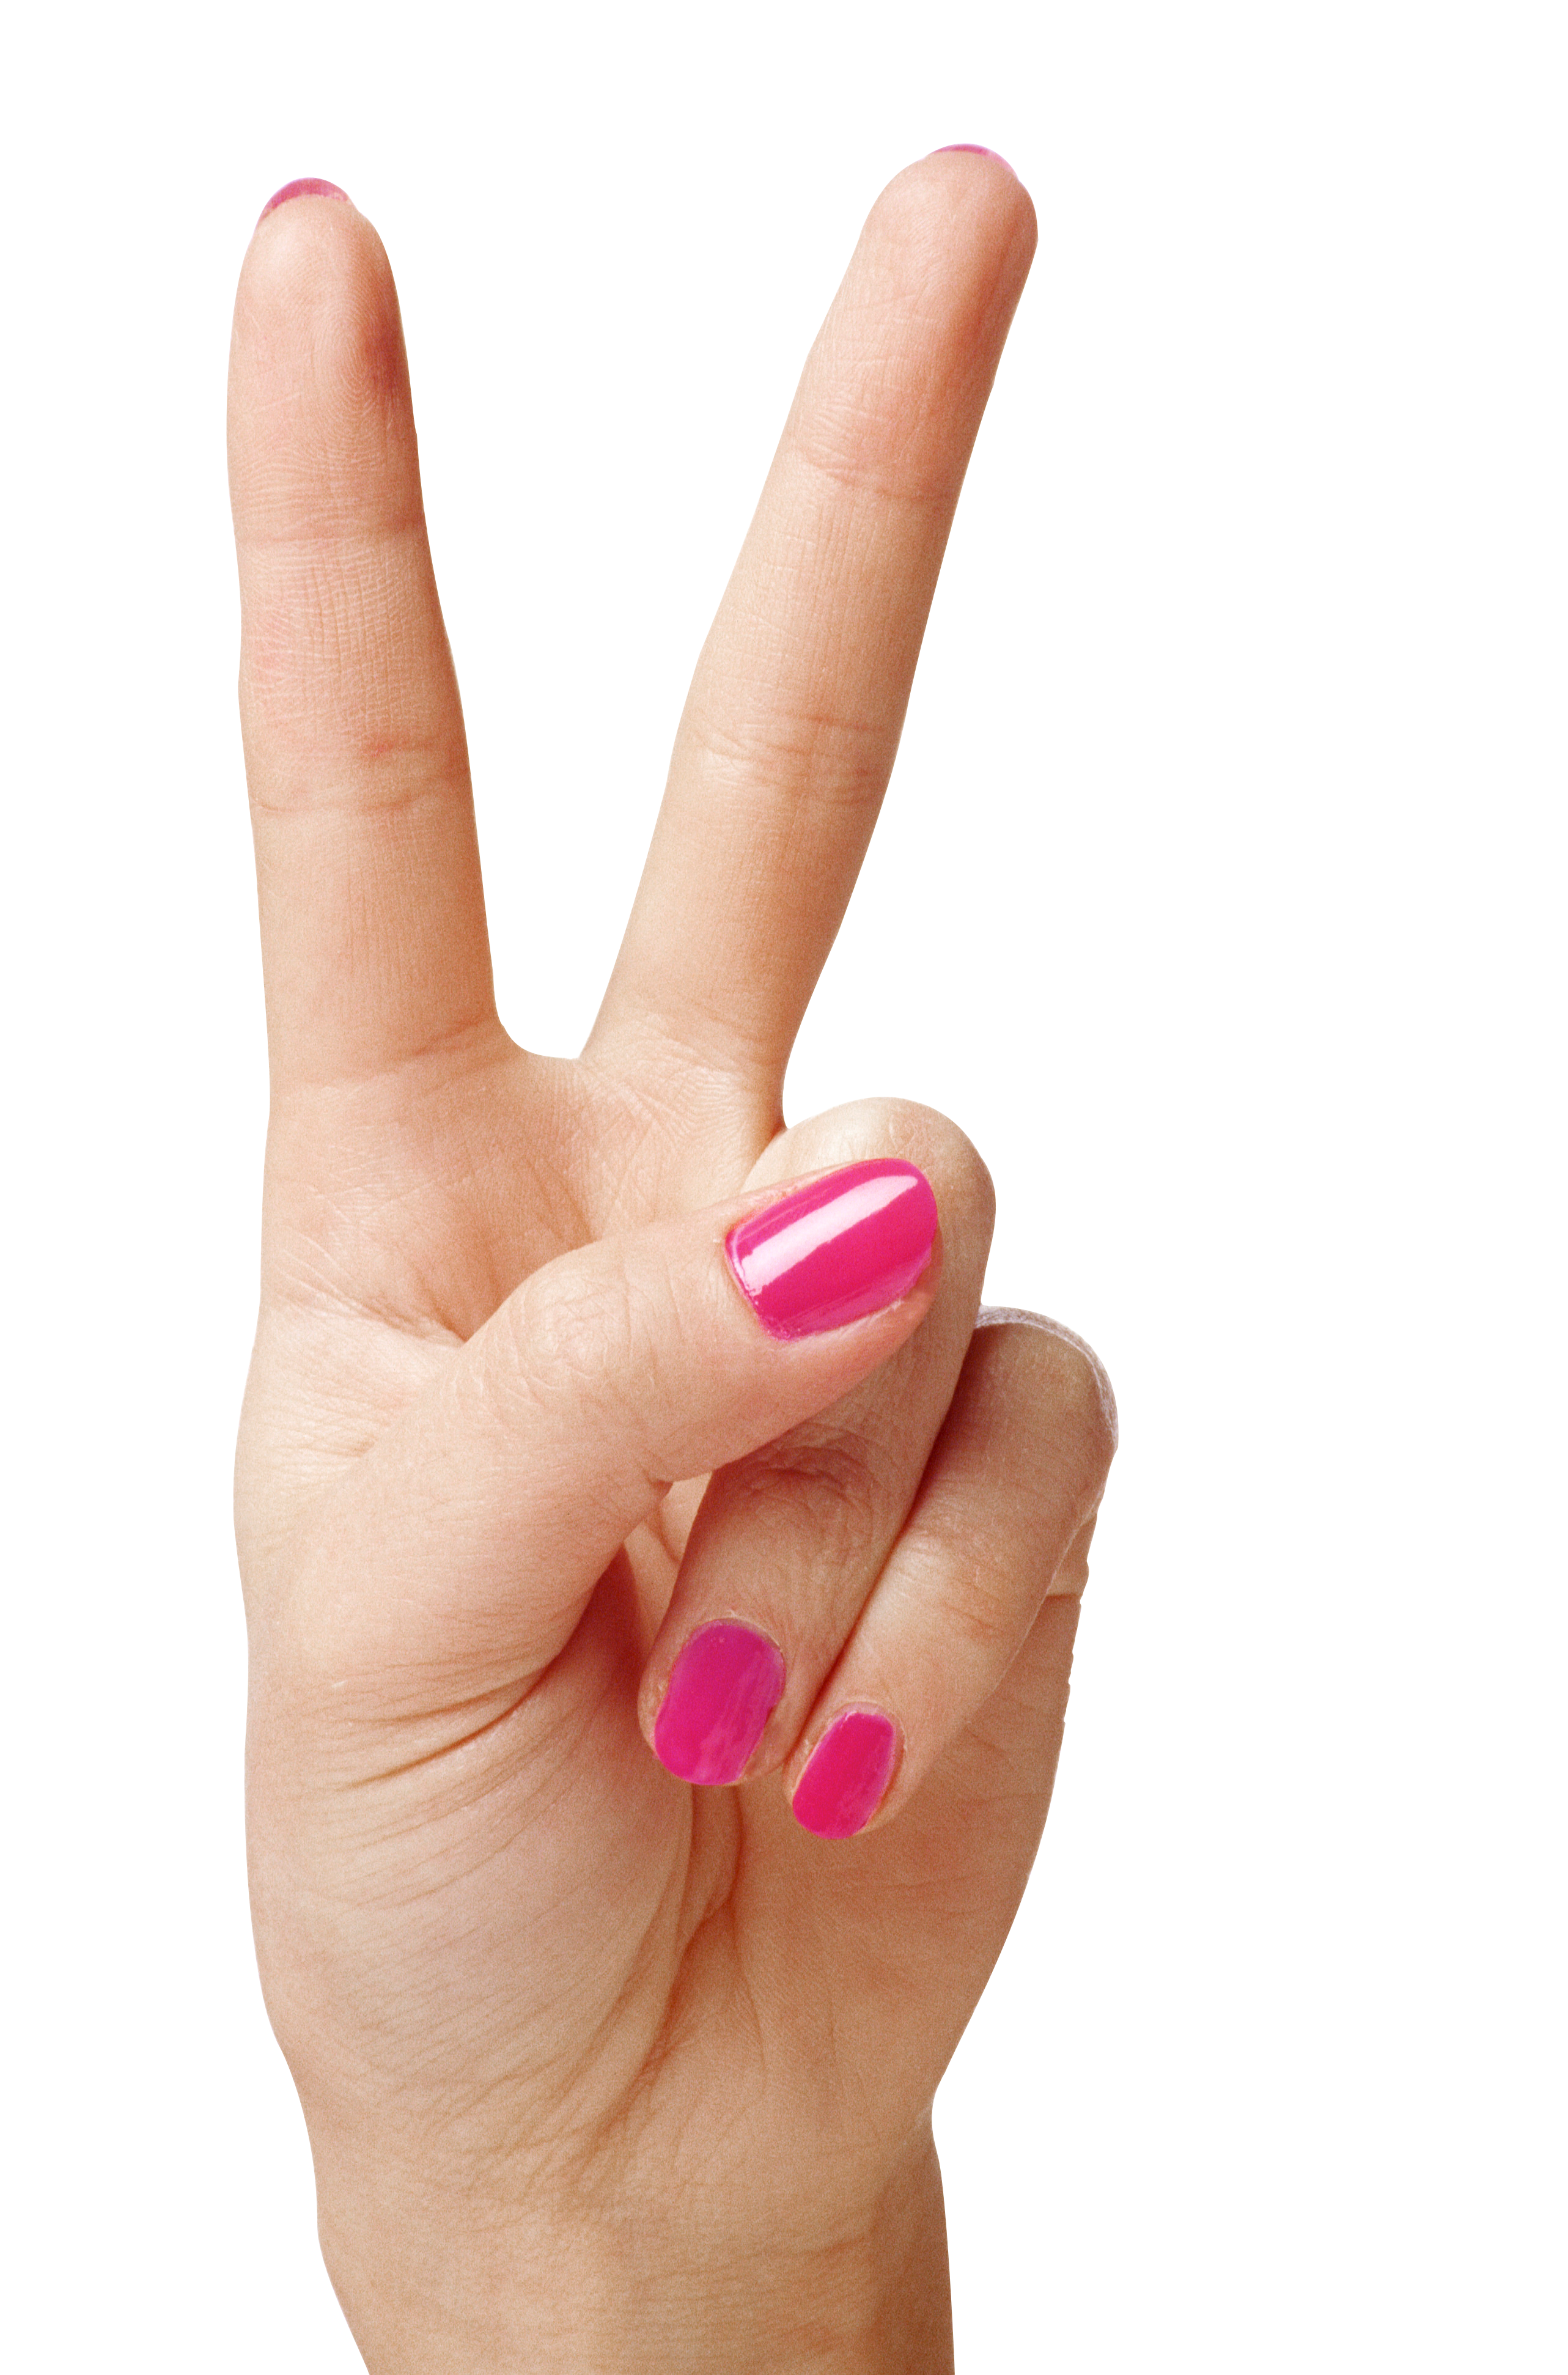 Hand Showing Two Fingers PNG Clipart Image.